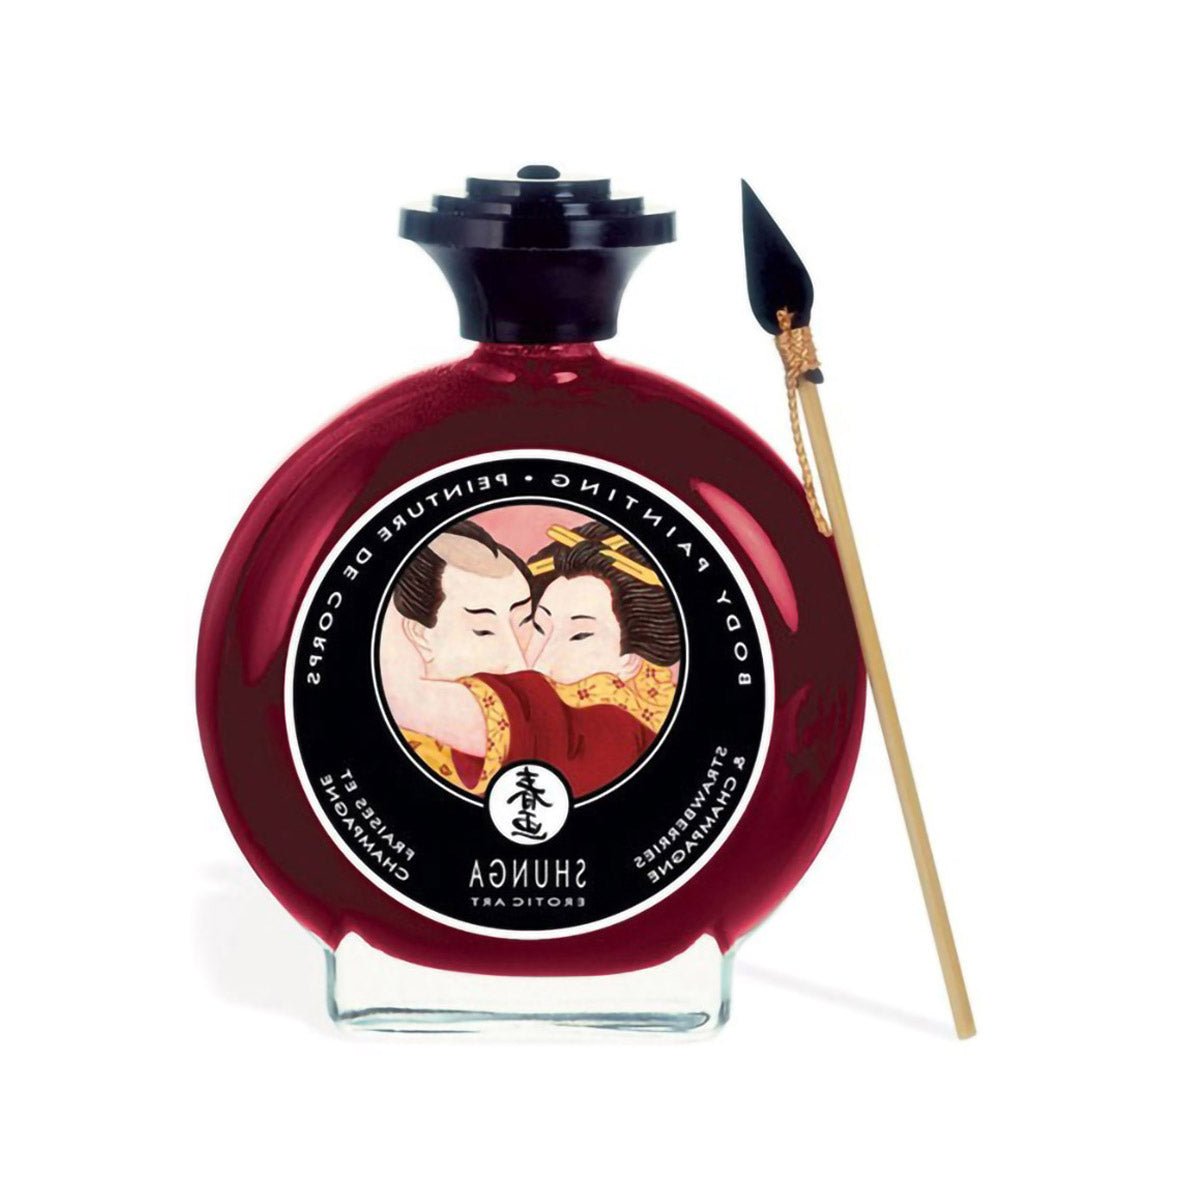 Shunga Edible Body Paint Painting with Brush Champagne & Strawberry Flavored